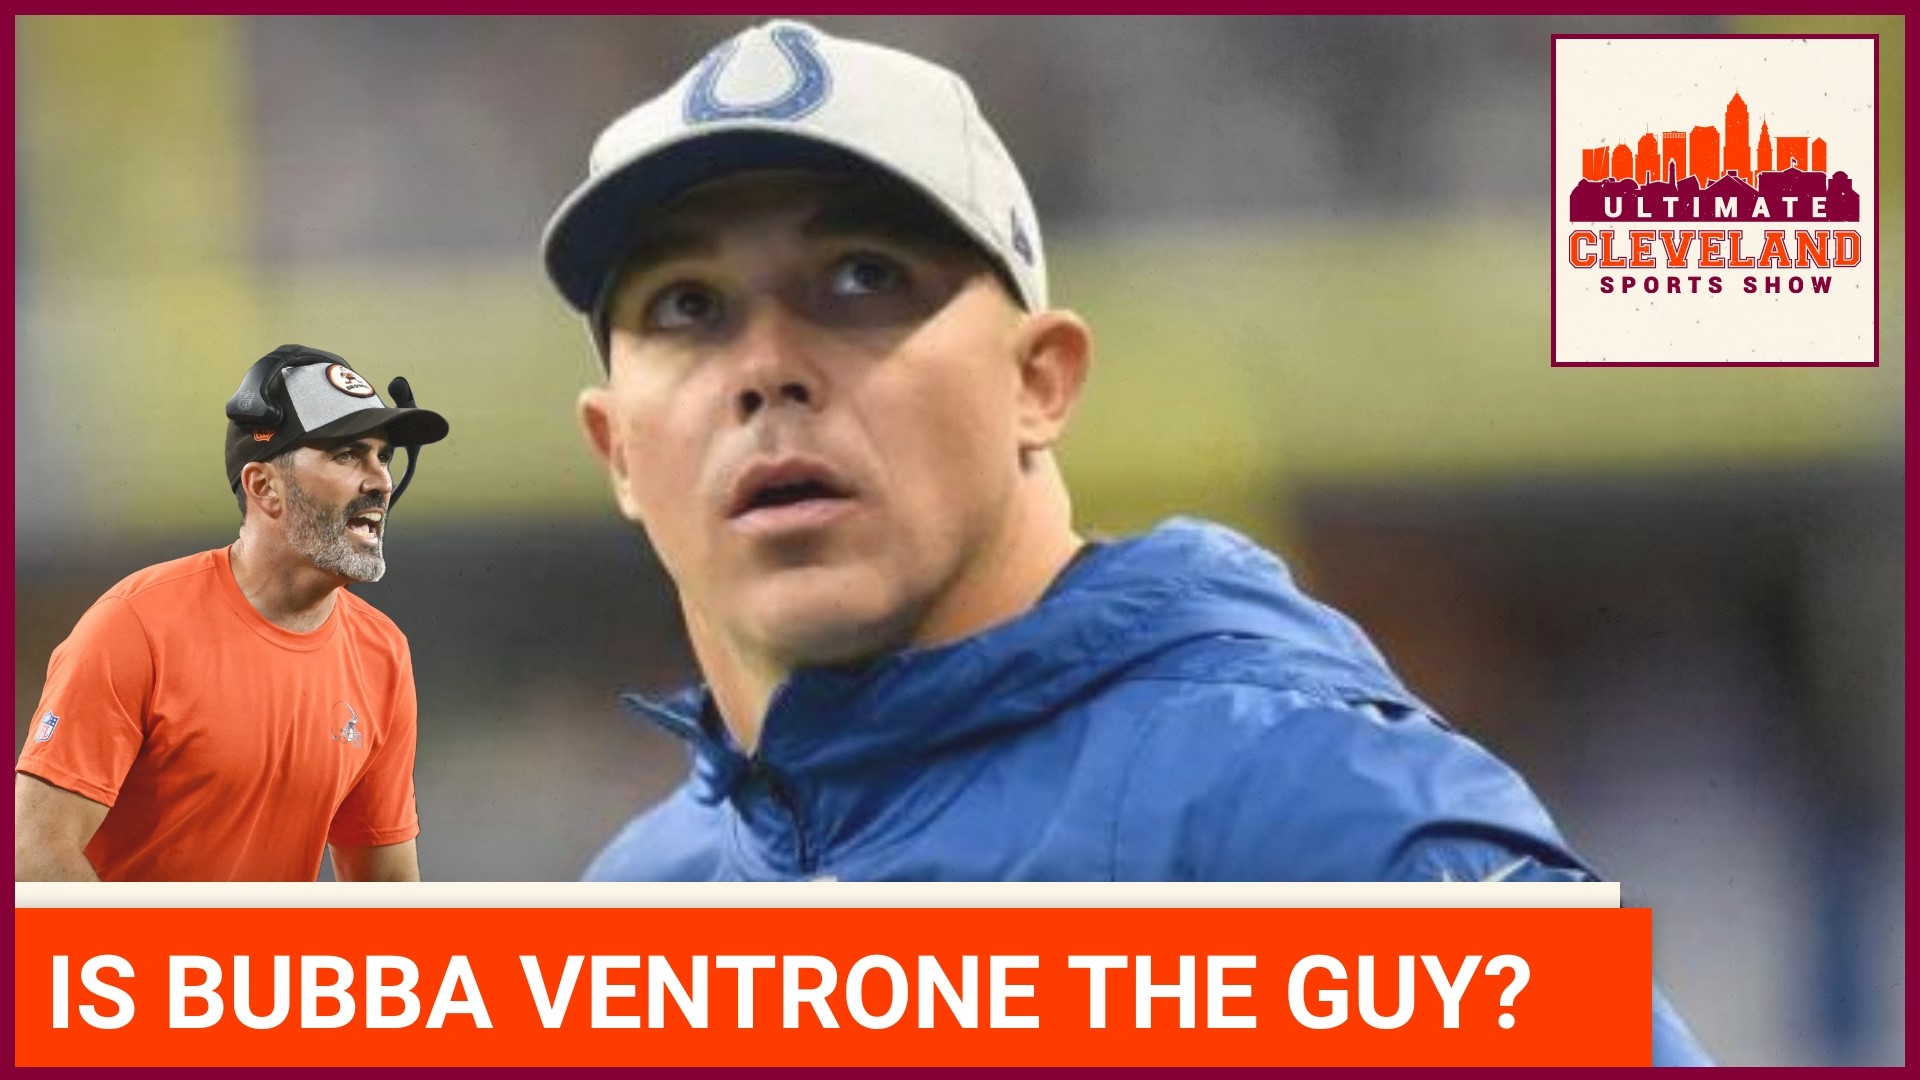 The Cleveland Browns are set to interview with Bubba Ventrone for vacant ST Coordinator job